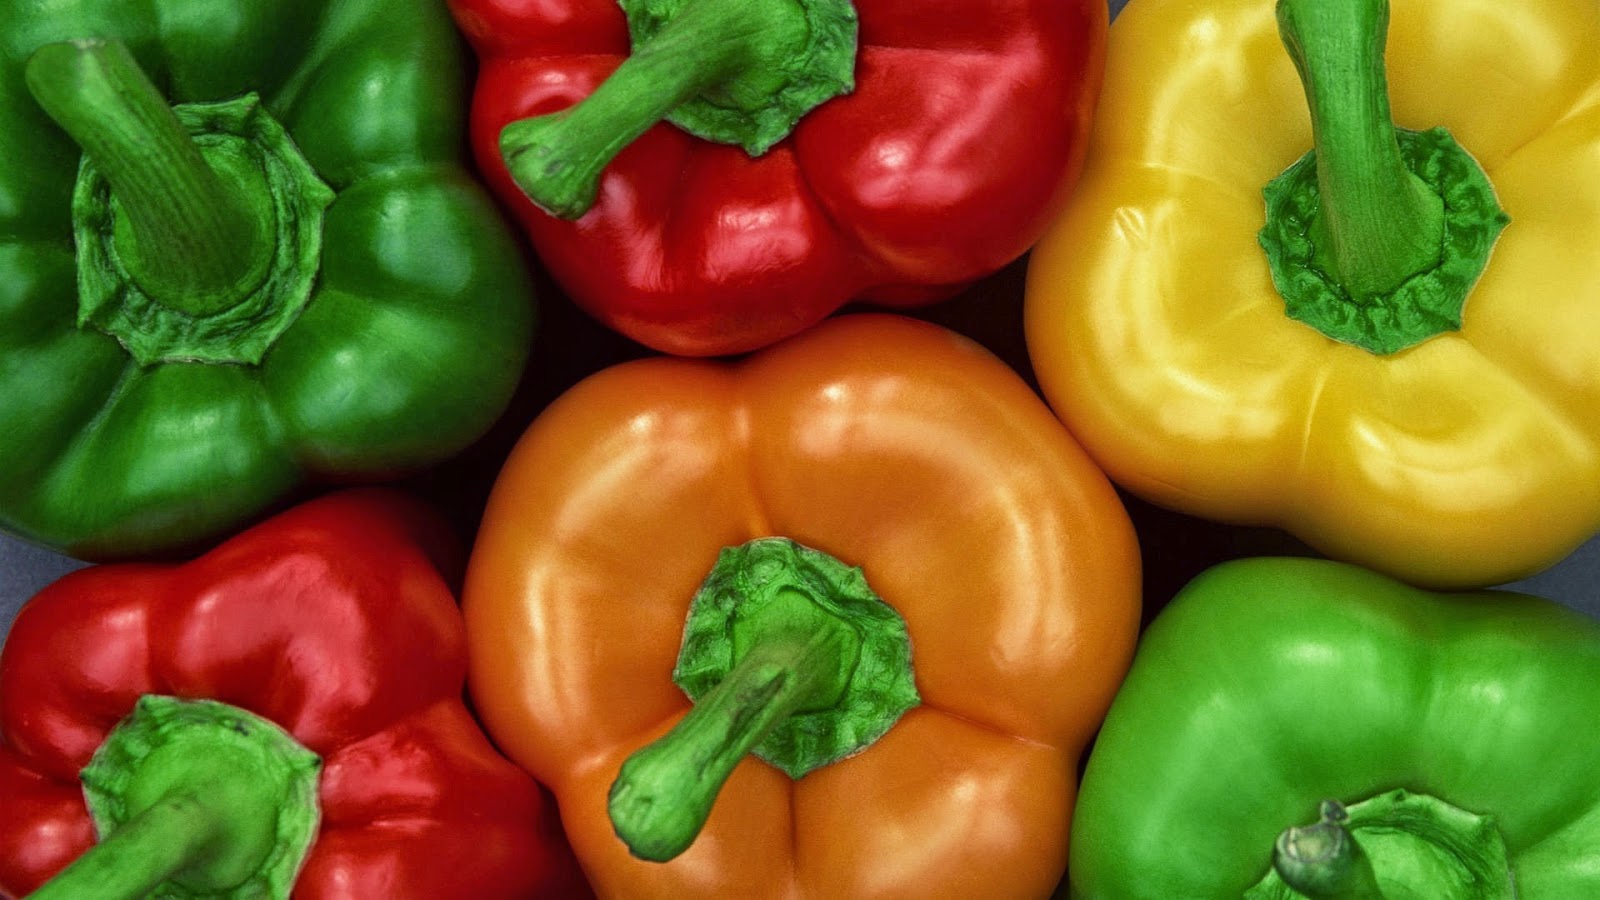 Green, red and yellow: the taste of the peppers in our recipes